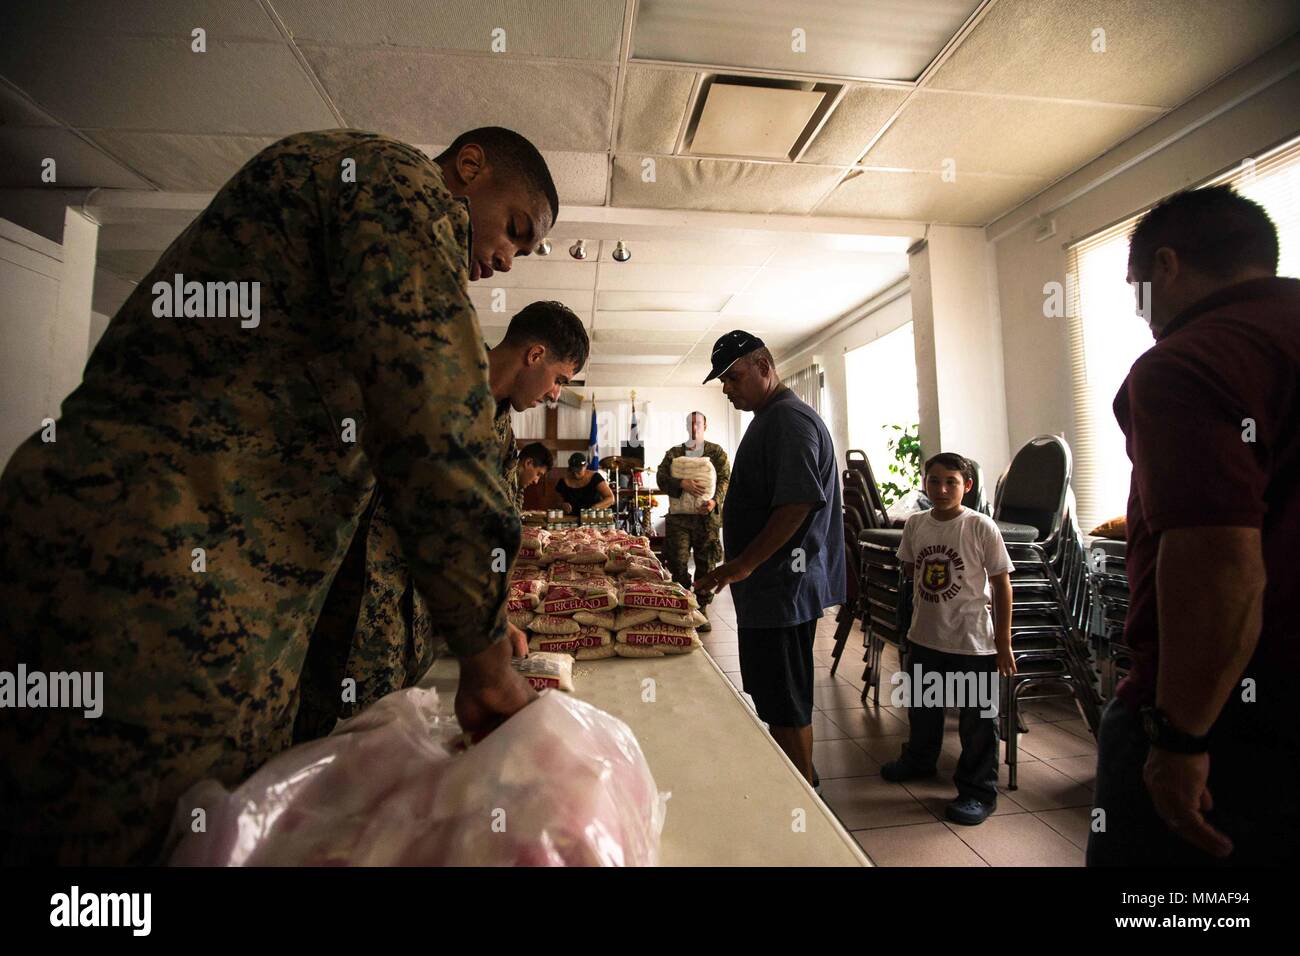 U.S. Marine Corps Lance Cpl. Rael G. Pascall, left, an embark specialist with the 26th Marine Expeditionary Unit (MEU), helps stock food for the community at a local Salvation Army as part of relief efforts for victims of Hurricane Maria in Fajardo, Puerto Rico, Oct. 3, 2017. The 26th MEU, along with local authorities and other Department of Defense services, is supporting the lead federal agency, Federal Emergency Management Agency, in providing humanitarian aid efforts for Puerto Rico. (U.S. Marine Corps photo by Lance Cpl. Tojyea G. Matally) Stock Photo